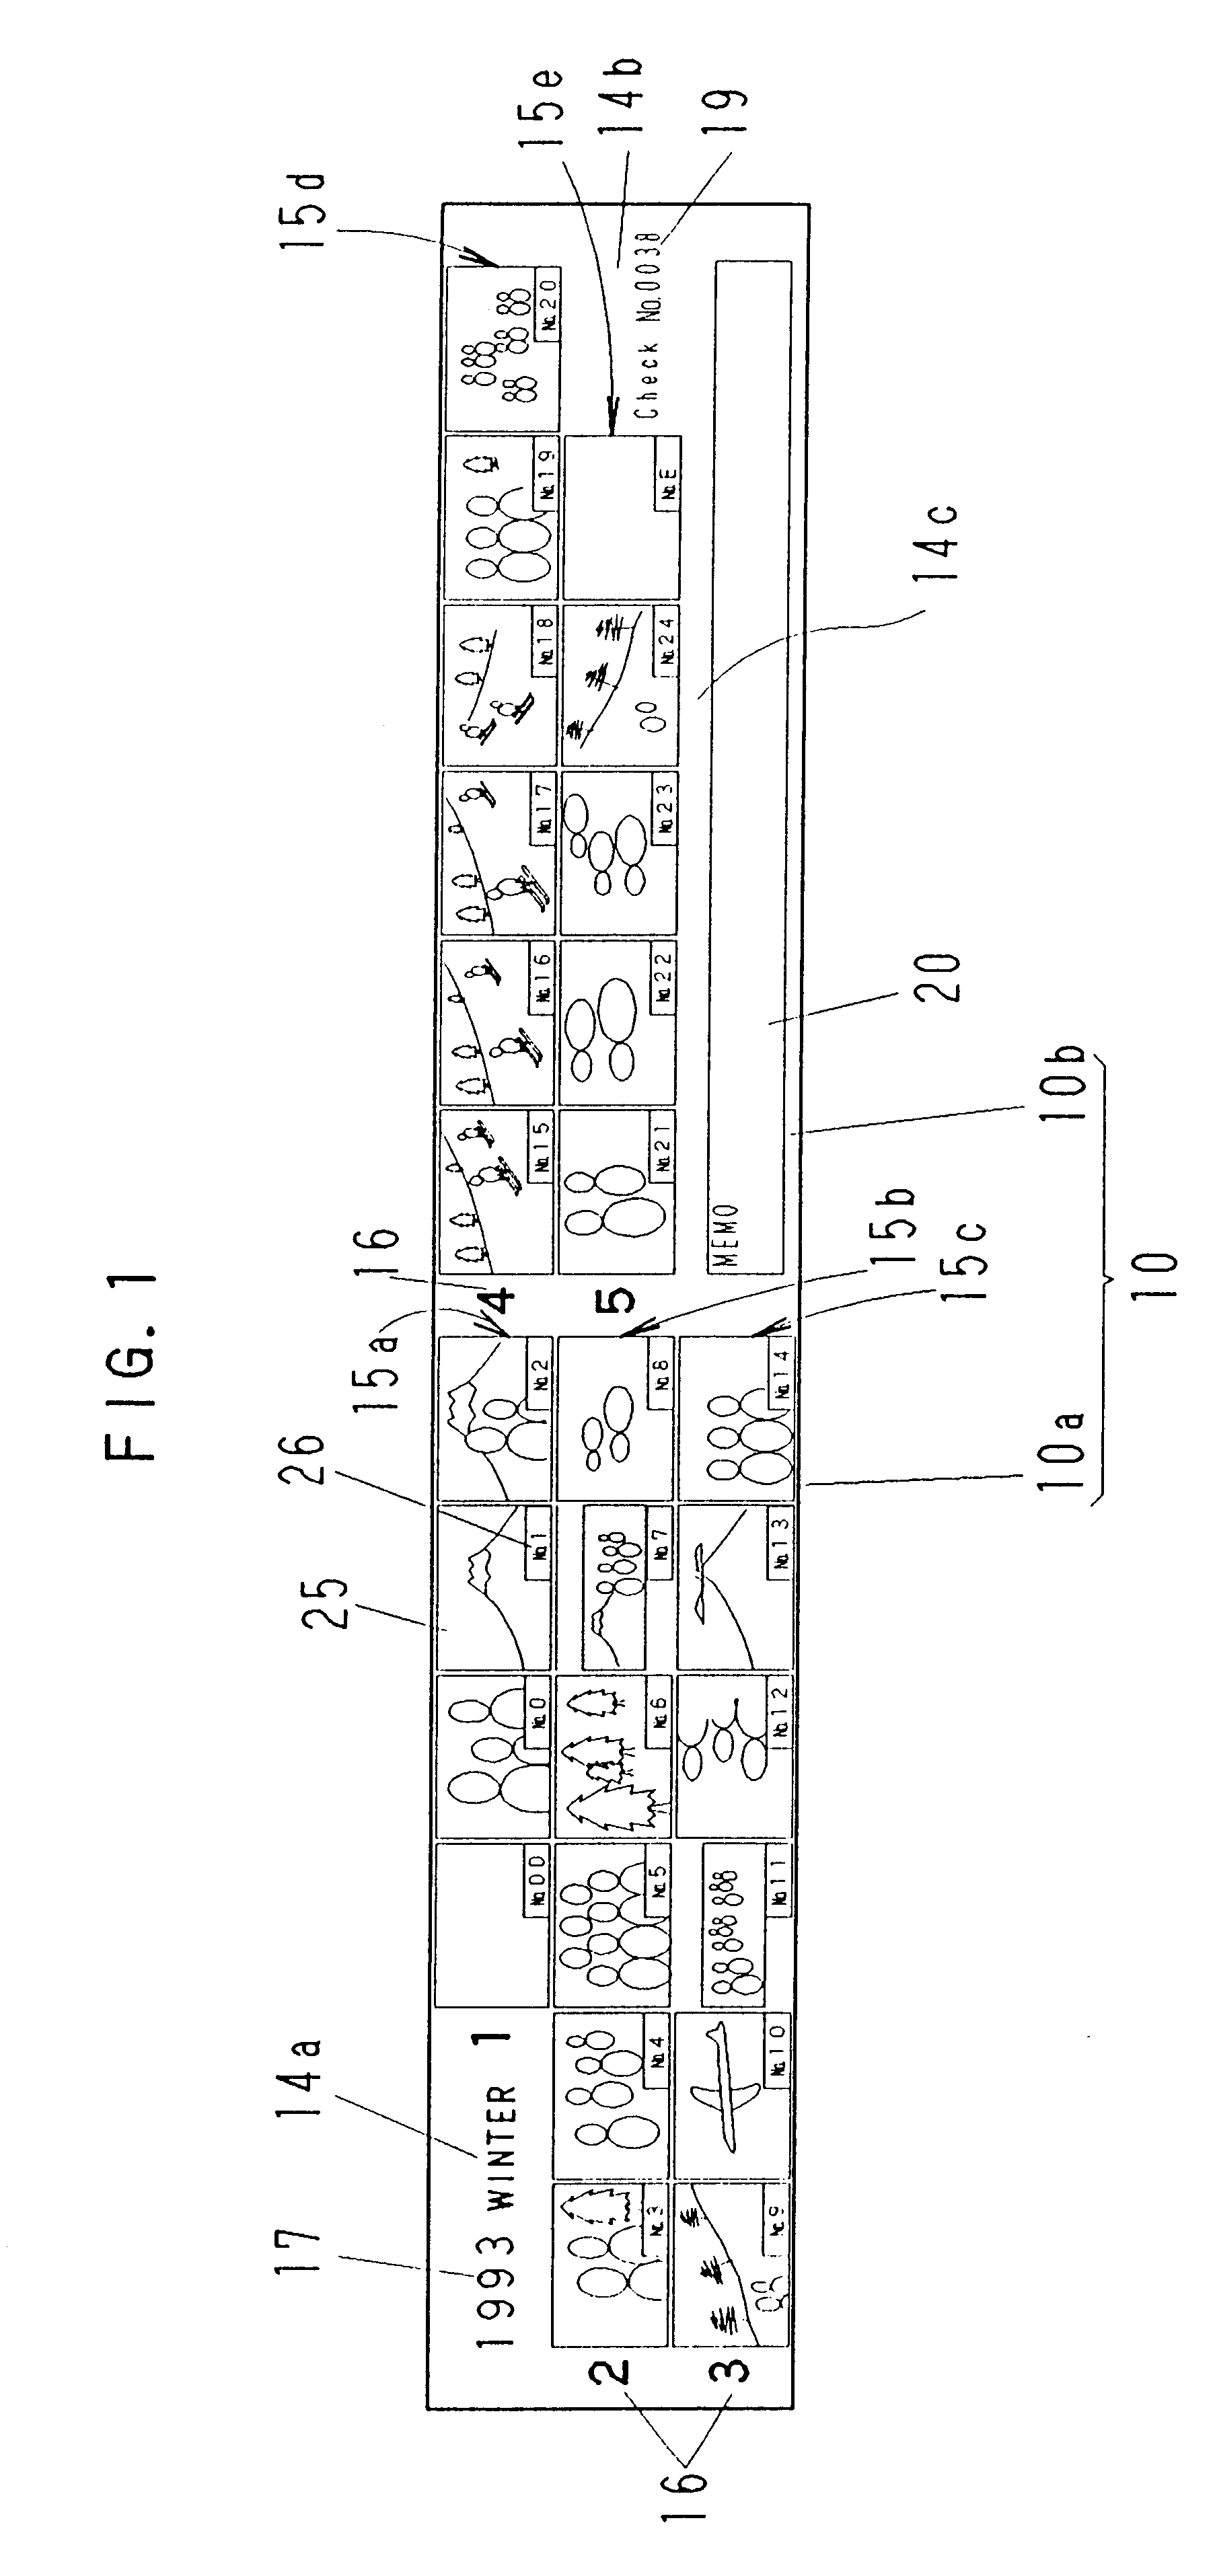 Index photograph, exposed film package, and film package producing system